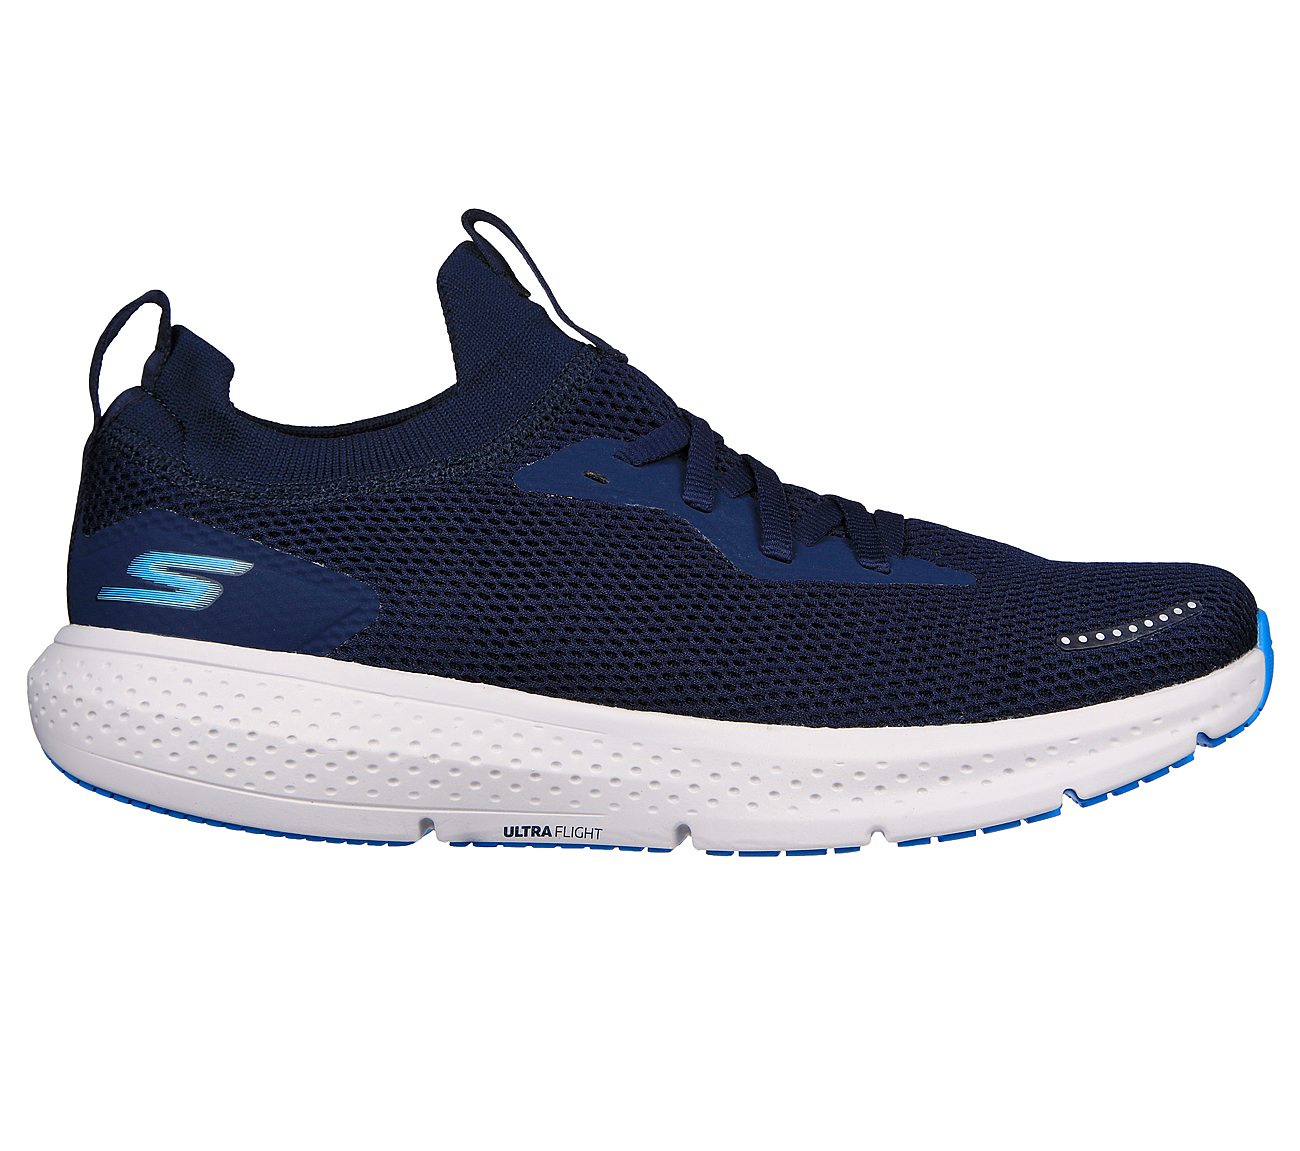 GO RUN SUPERSONIC - APEX, NNNAVY Footwear Lateral View